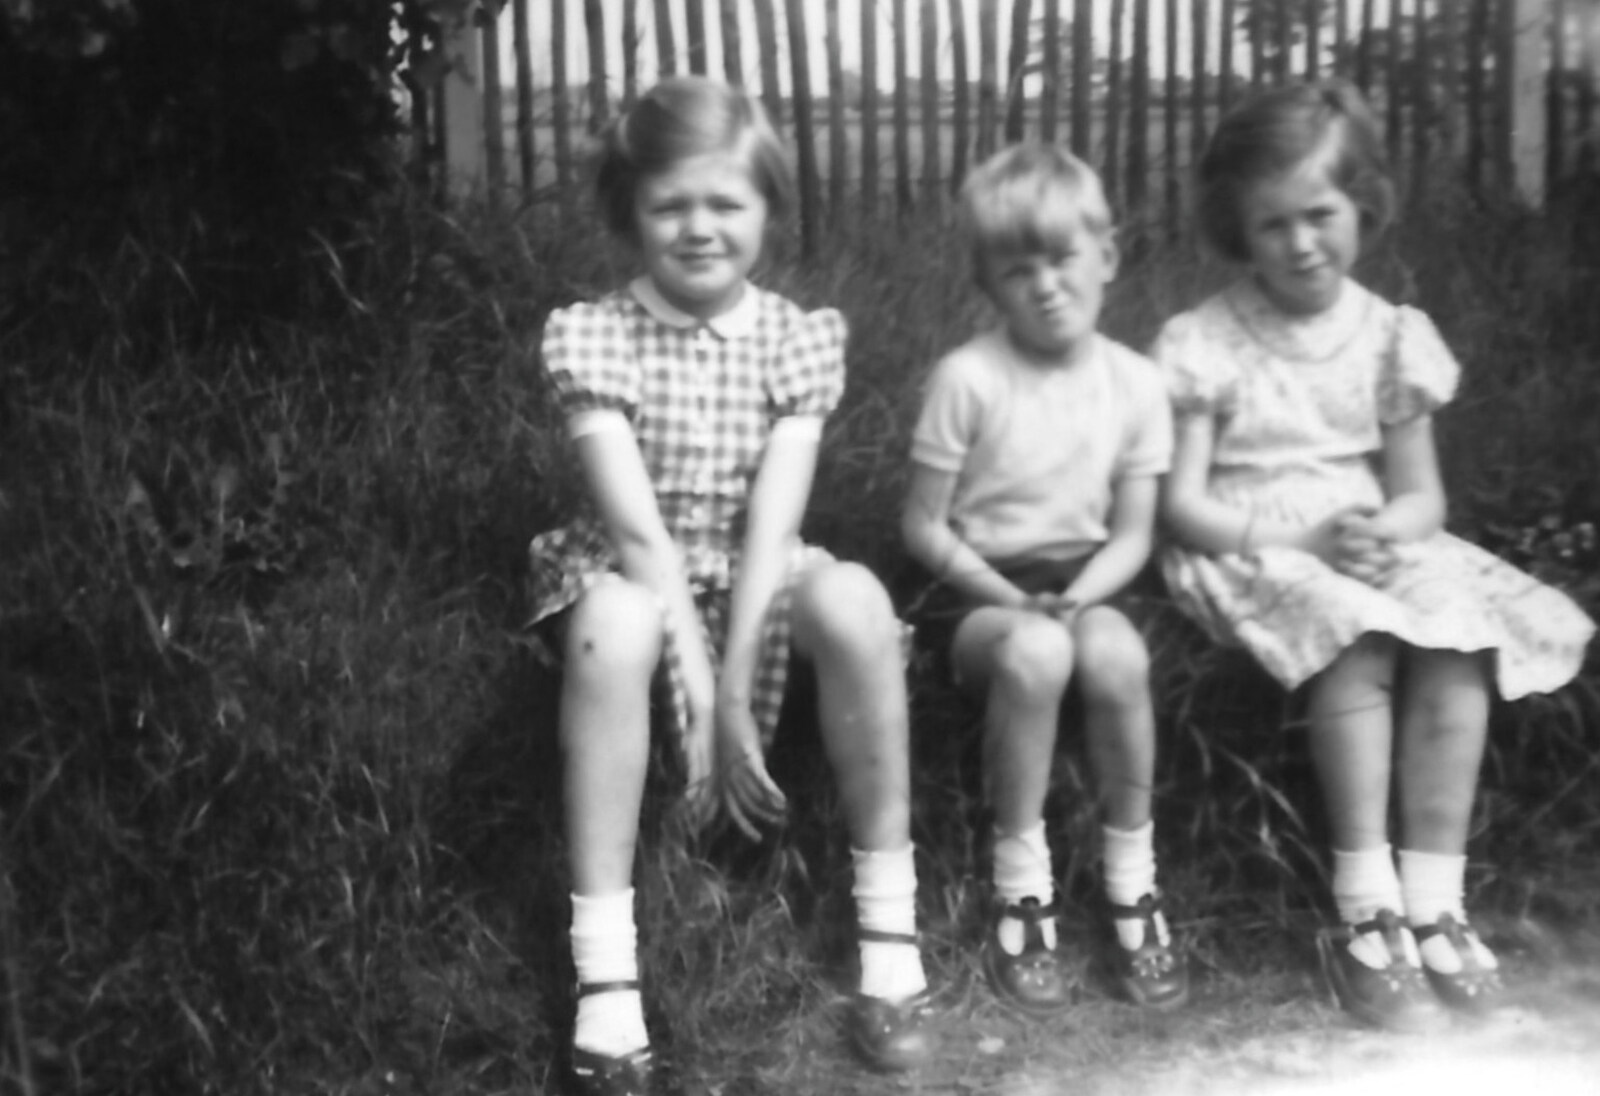 Family History: The 1940s and 1950s - 24th January 2020: Janet, Neil and Judith, 1956?